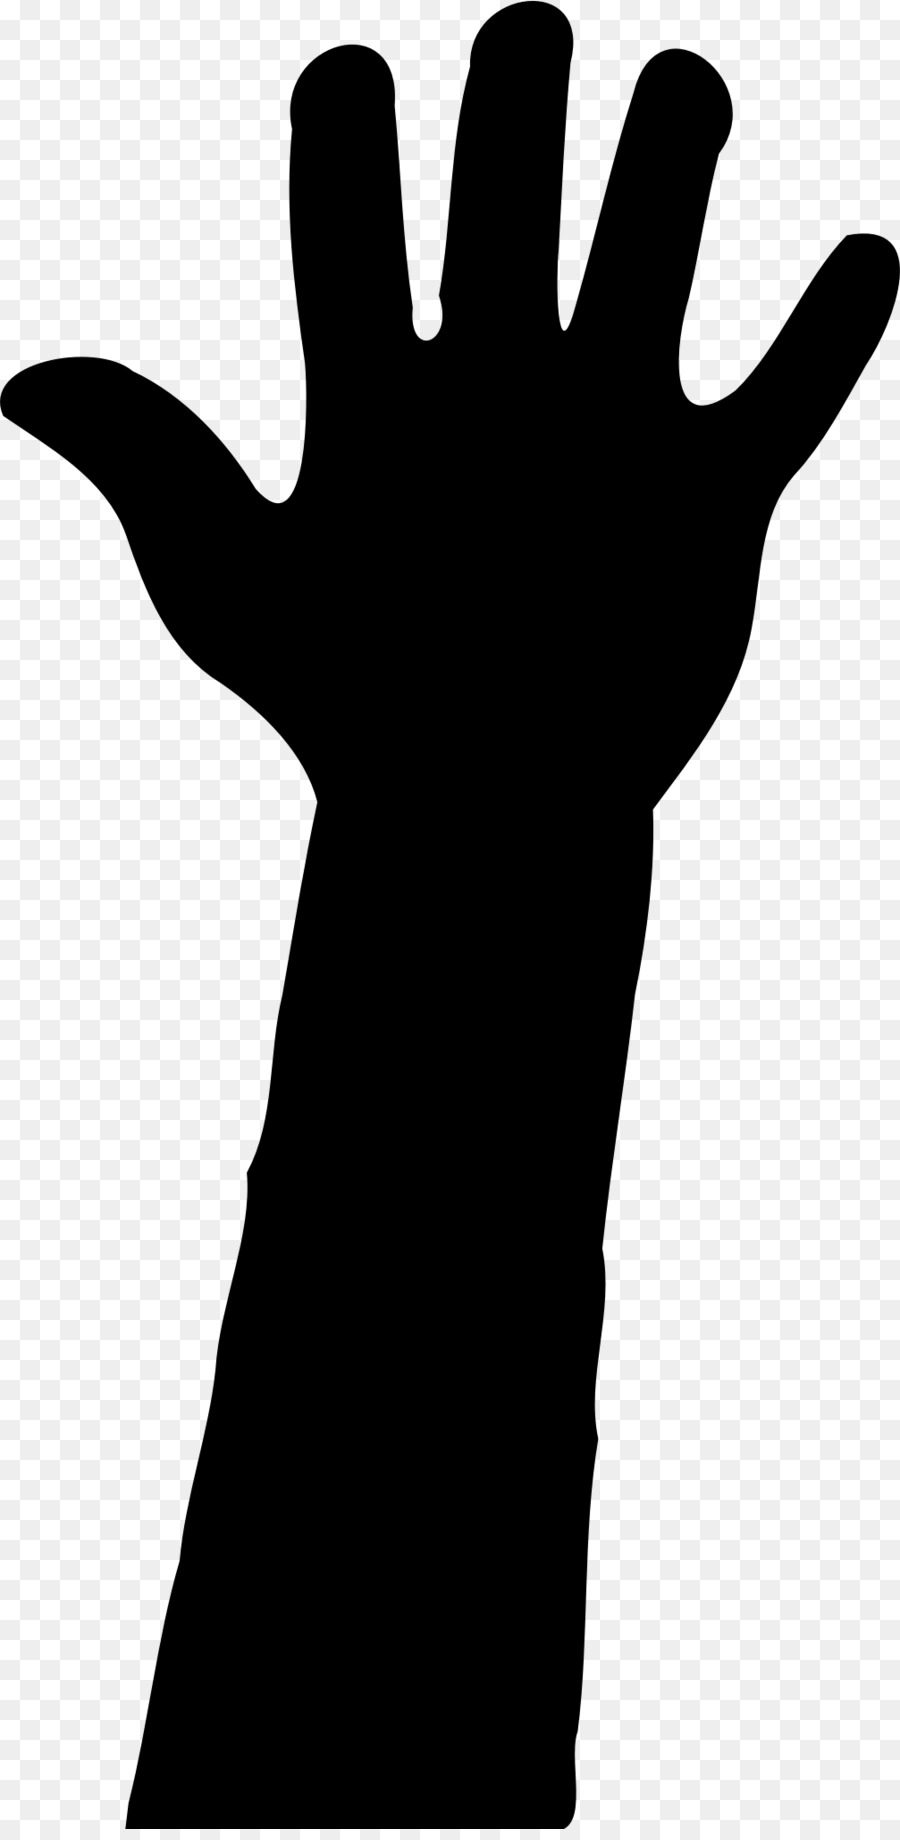 Silhouette Drawing Clip art - raise hand png download - 1007*2047 - Free Transparent Silhouette png Download.